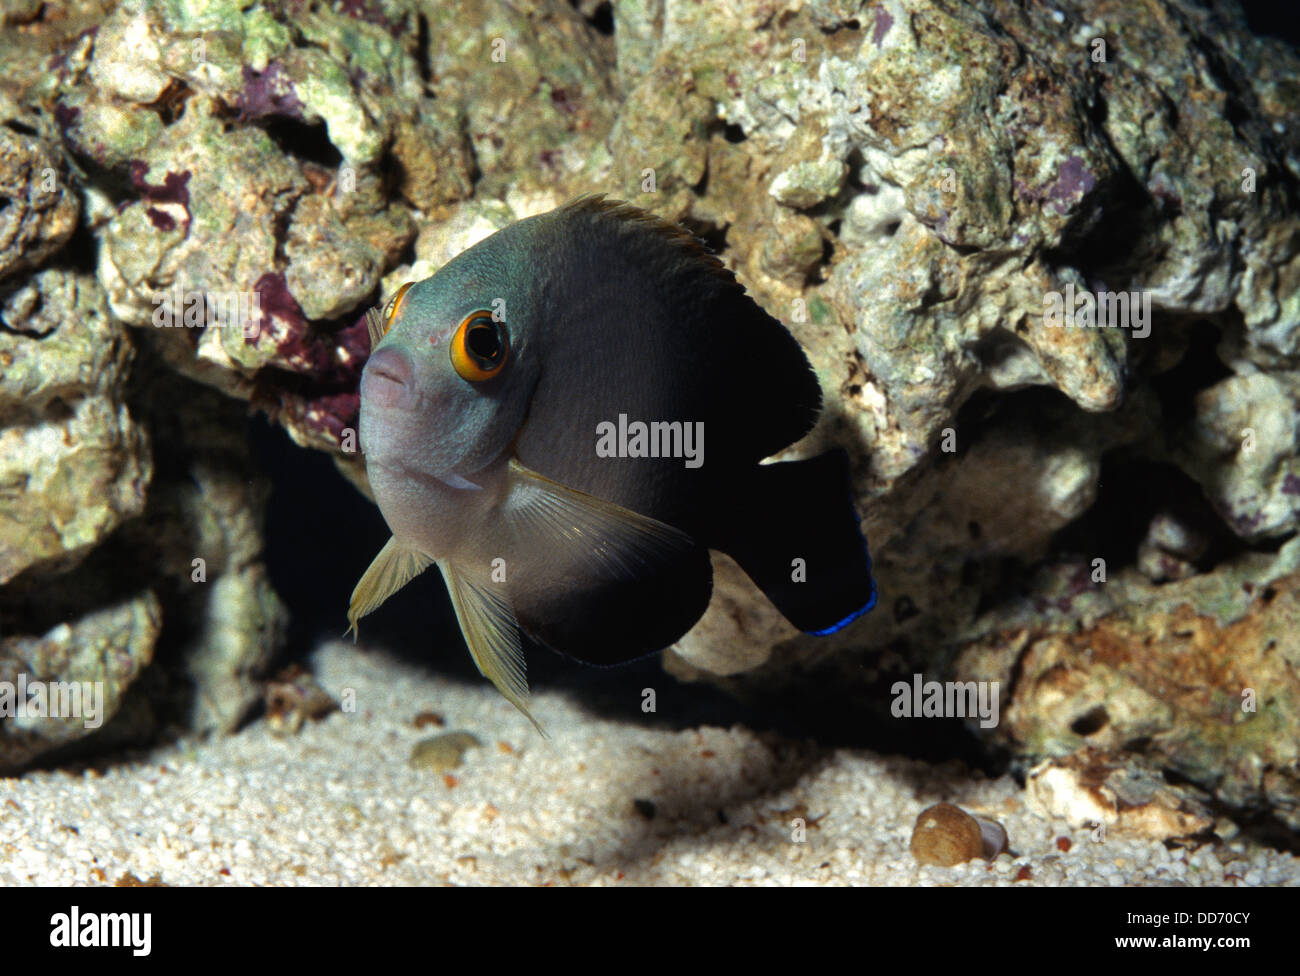 Pearl-Scaled Angelfish, Centropyge vroliki, Pomacanthidae, Indo-Pacific Ocean Stock Photo